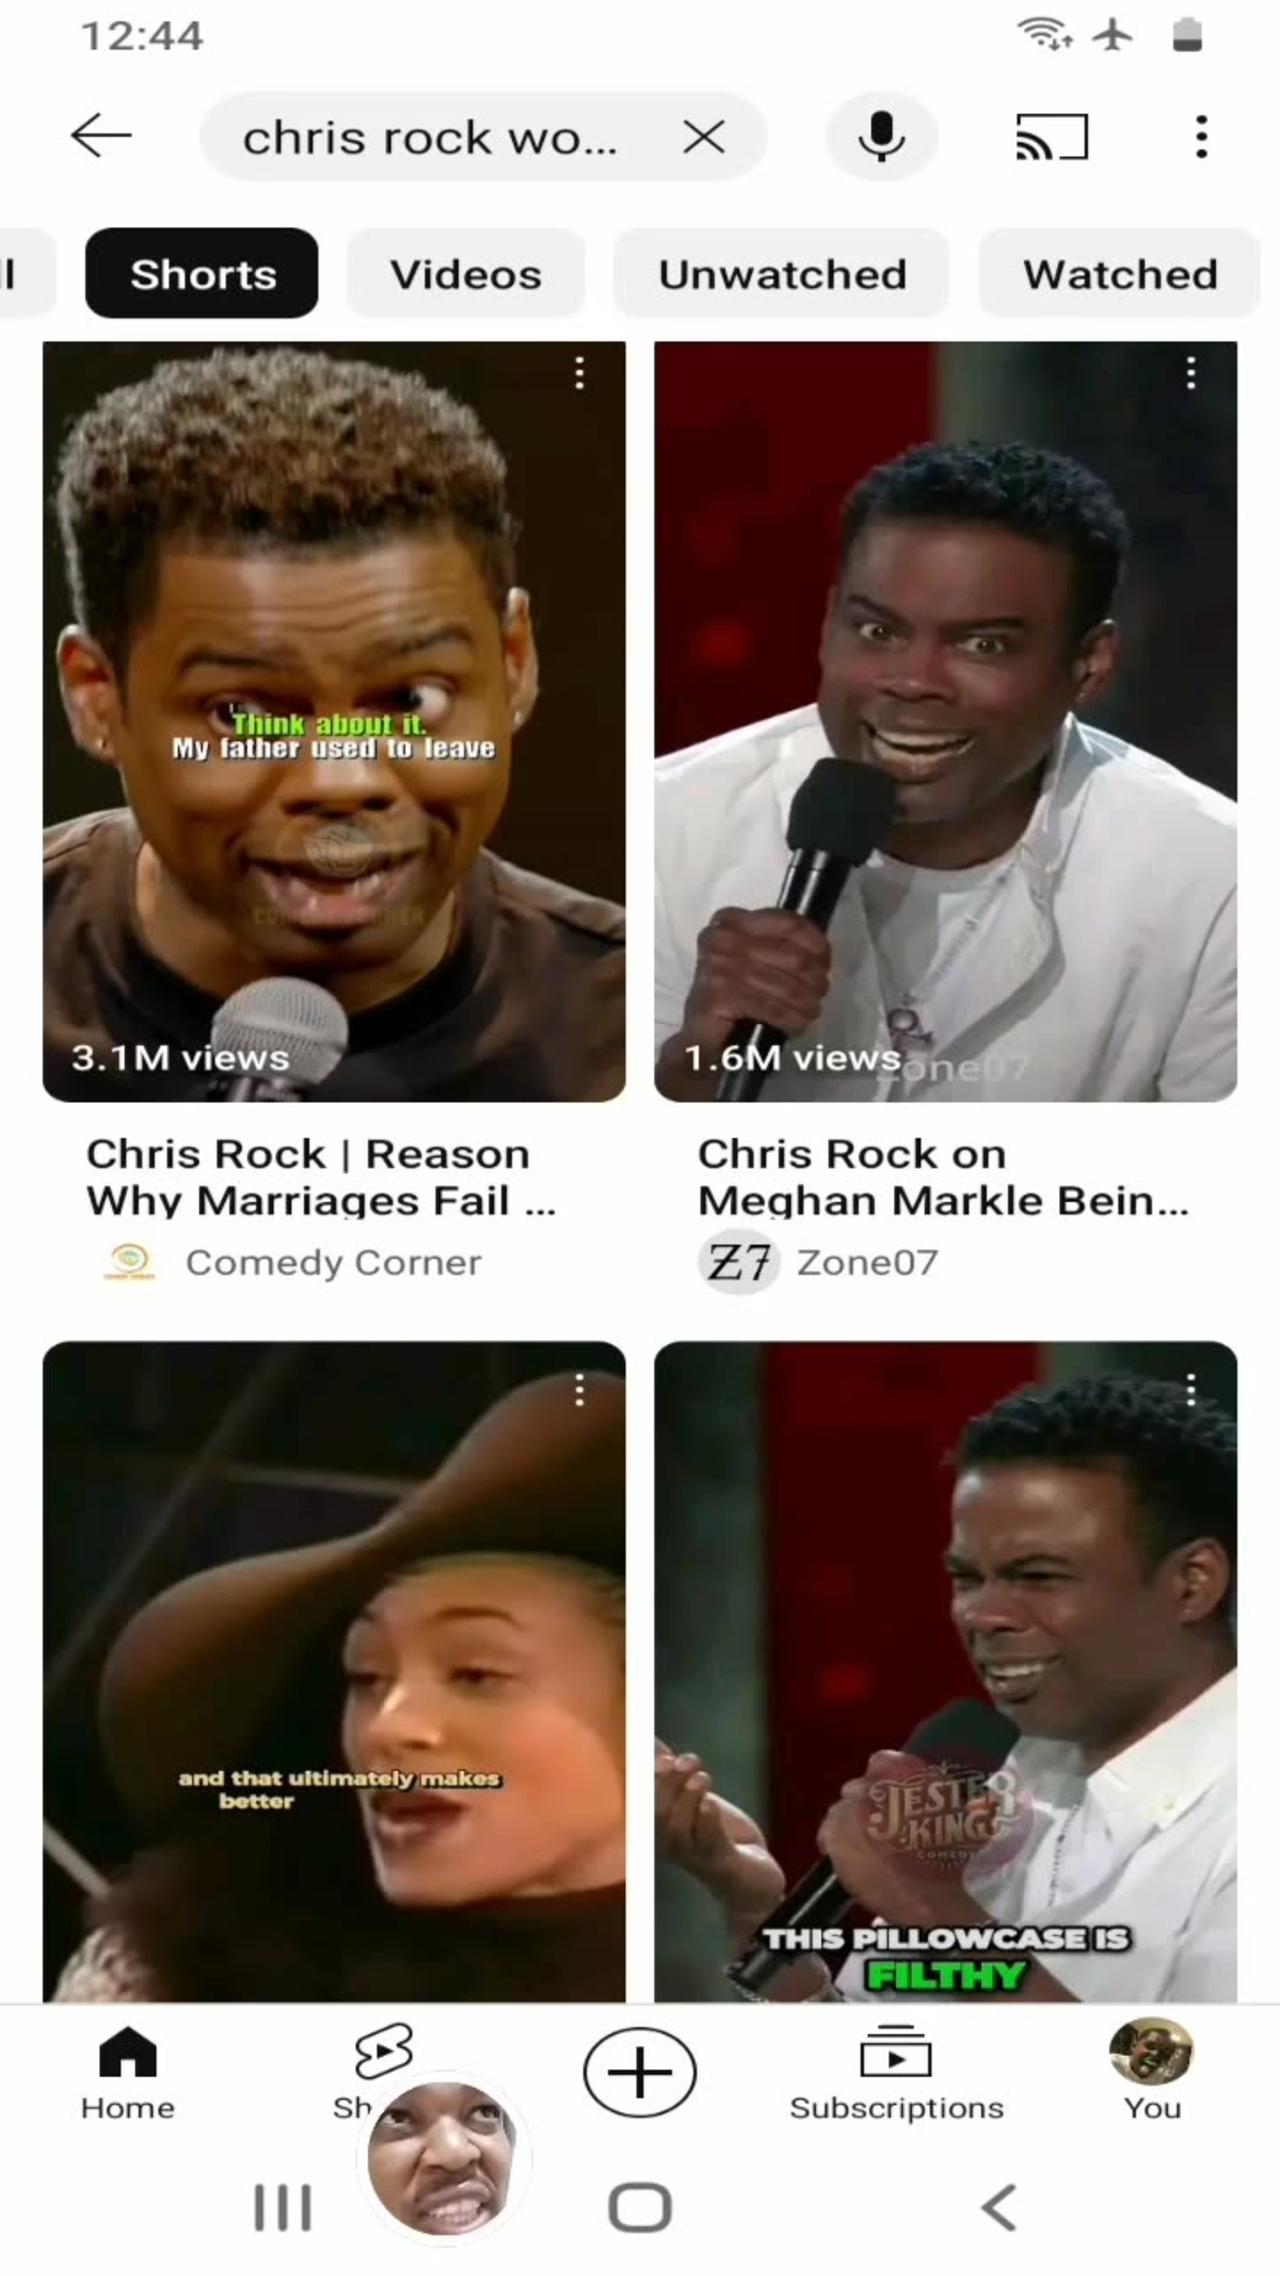 Why do you love Chris Rock?